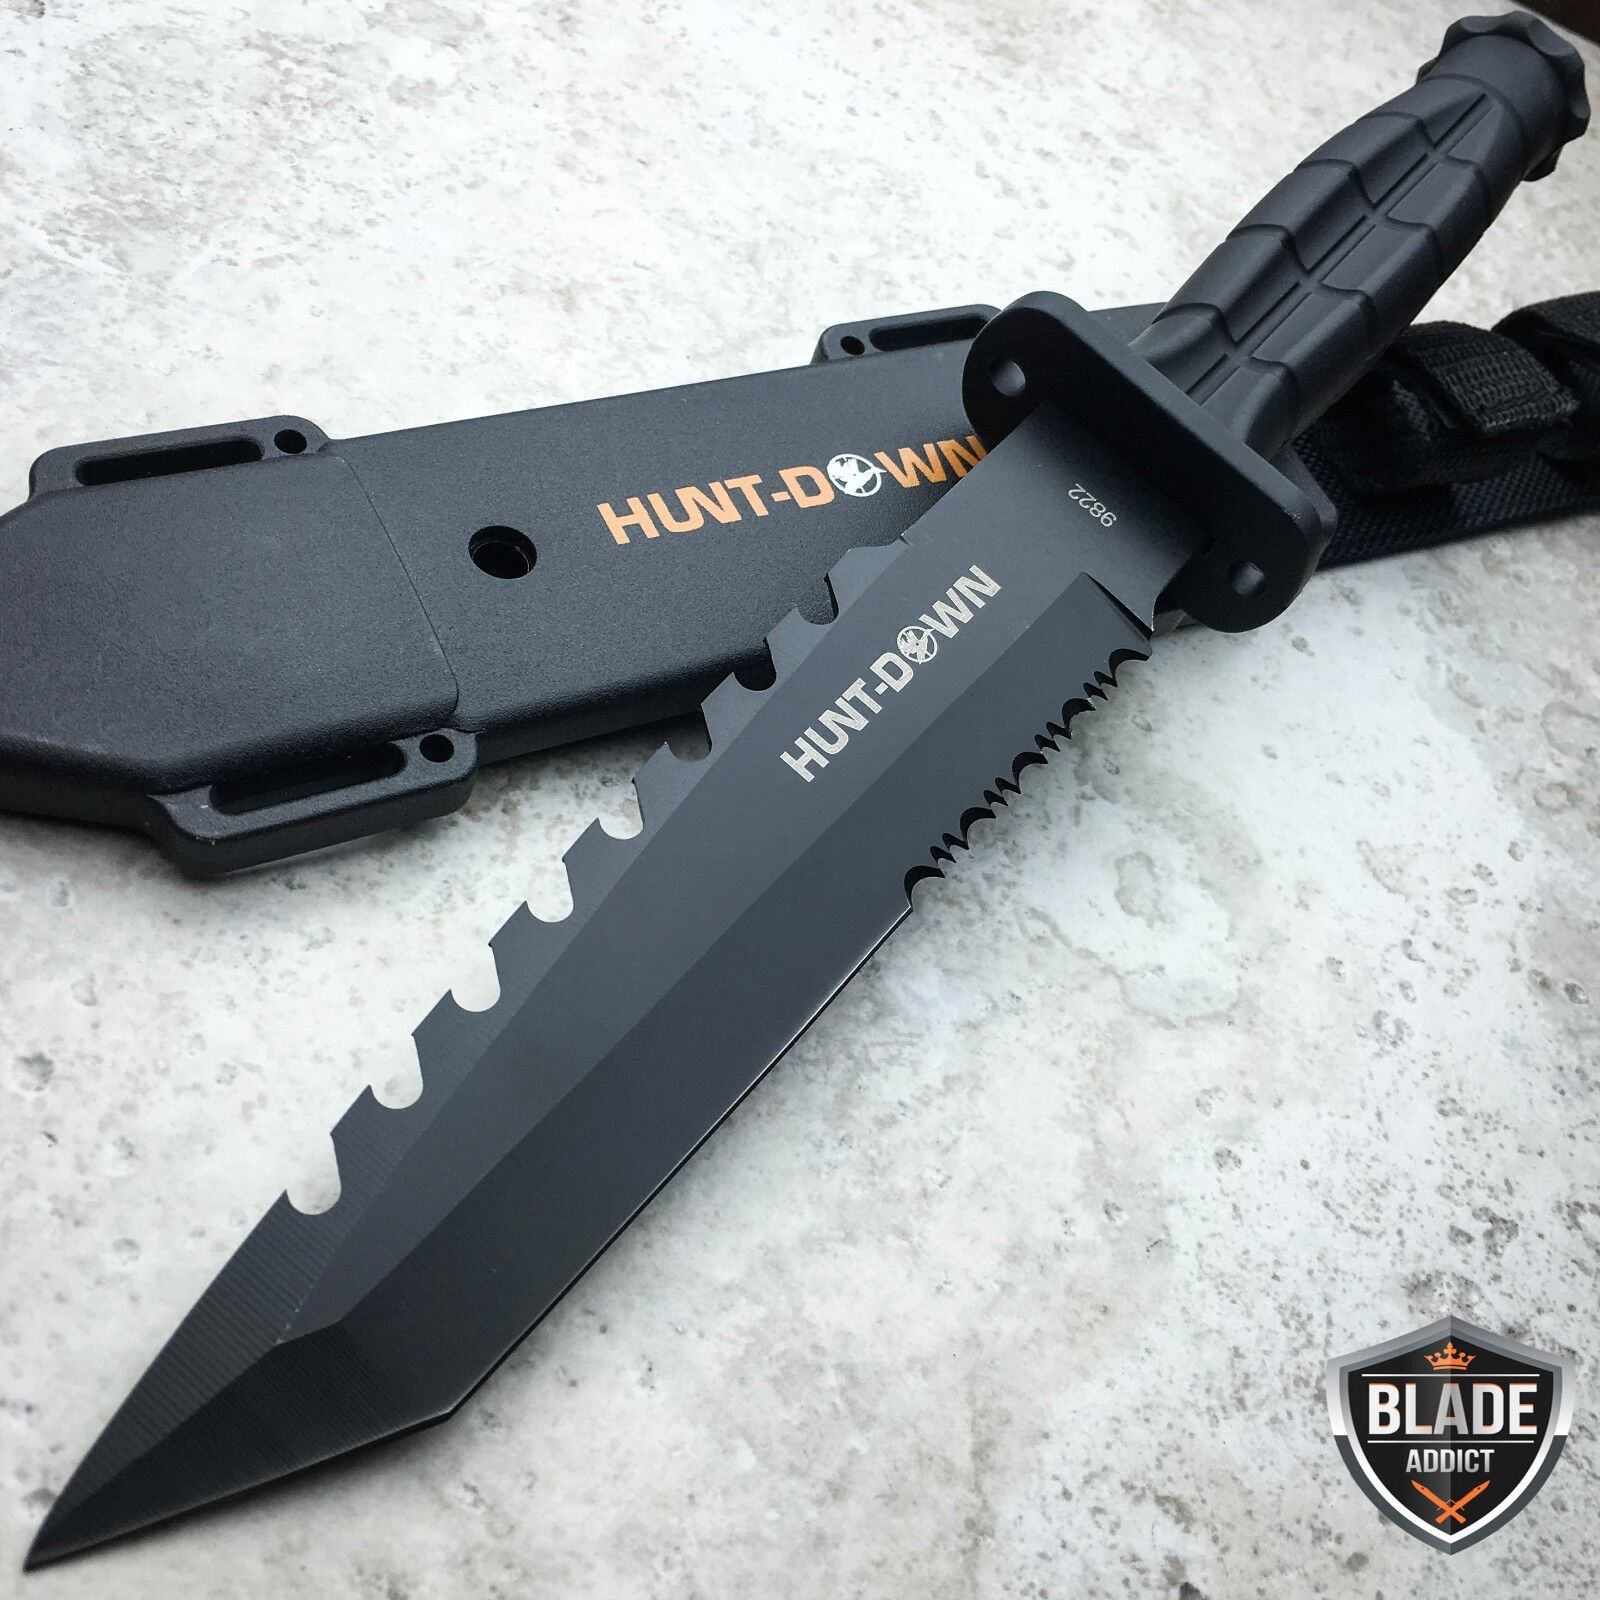 12" TACTICAL BOWIE SURVIVAL HUNTING KNIFE MILITARY Combat Fixed Blade w/ SHEATH Hunt Down